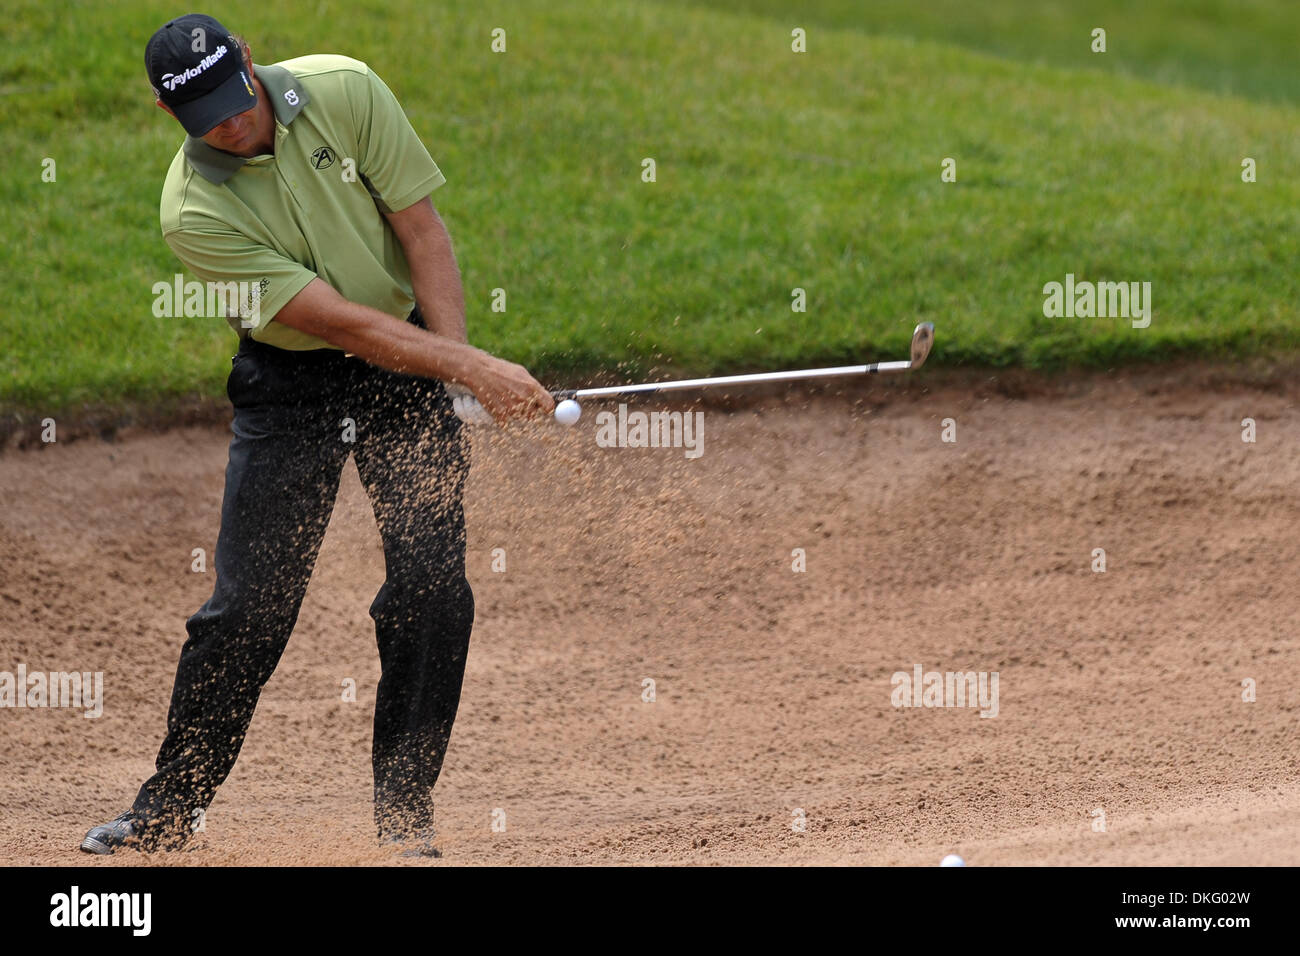 Jul 27, 2009 - Oakville, Ontario, Canada - RETIEF GOOSEN playing at the RBC Canadian Open in Oakville, Ontario at the Glen Abbey Golf Course. (Credit Image: © CJ LaFrance/Southcreek Global/ZUMA Press) Stock Photo